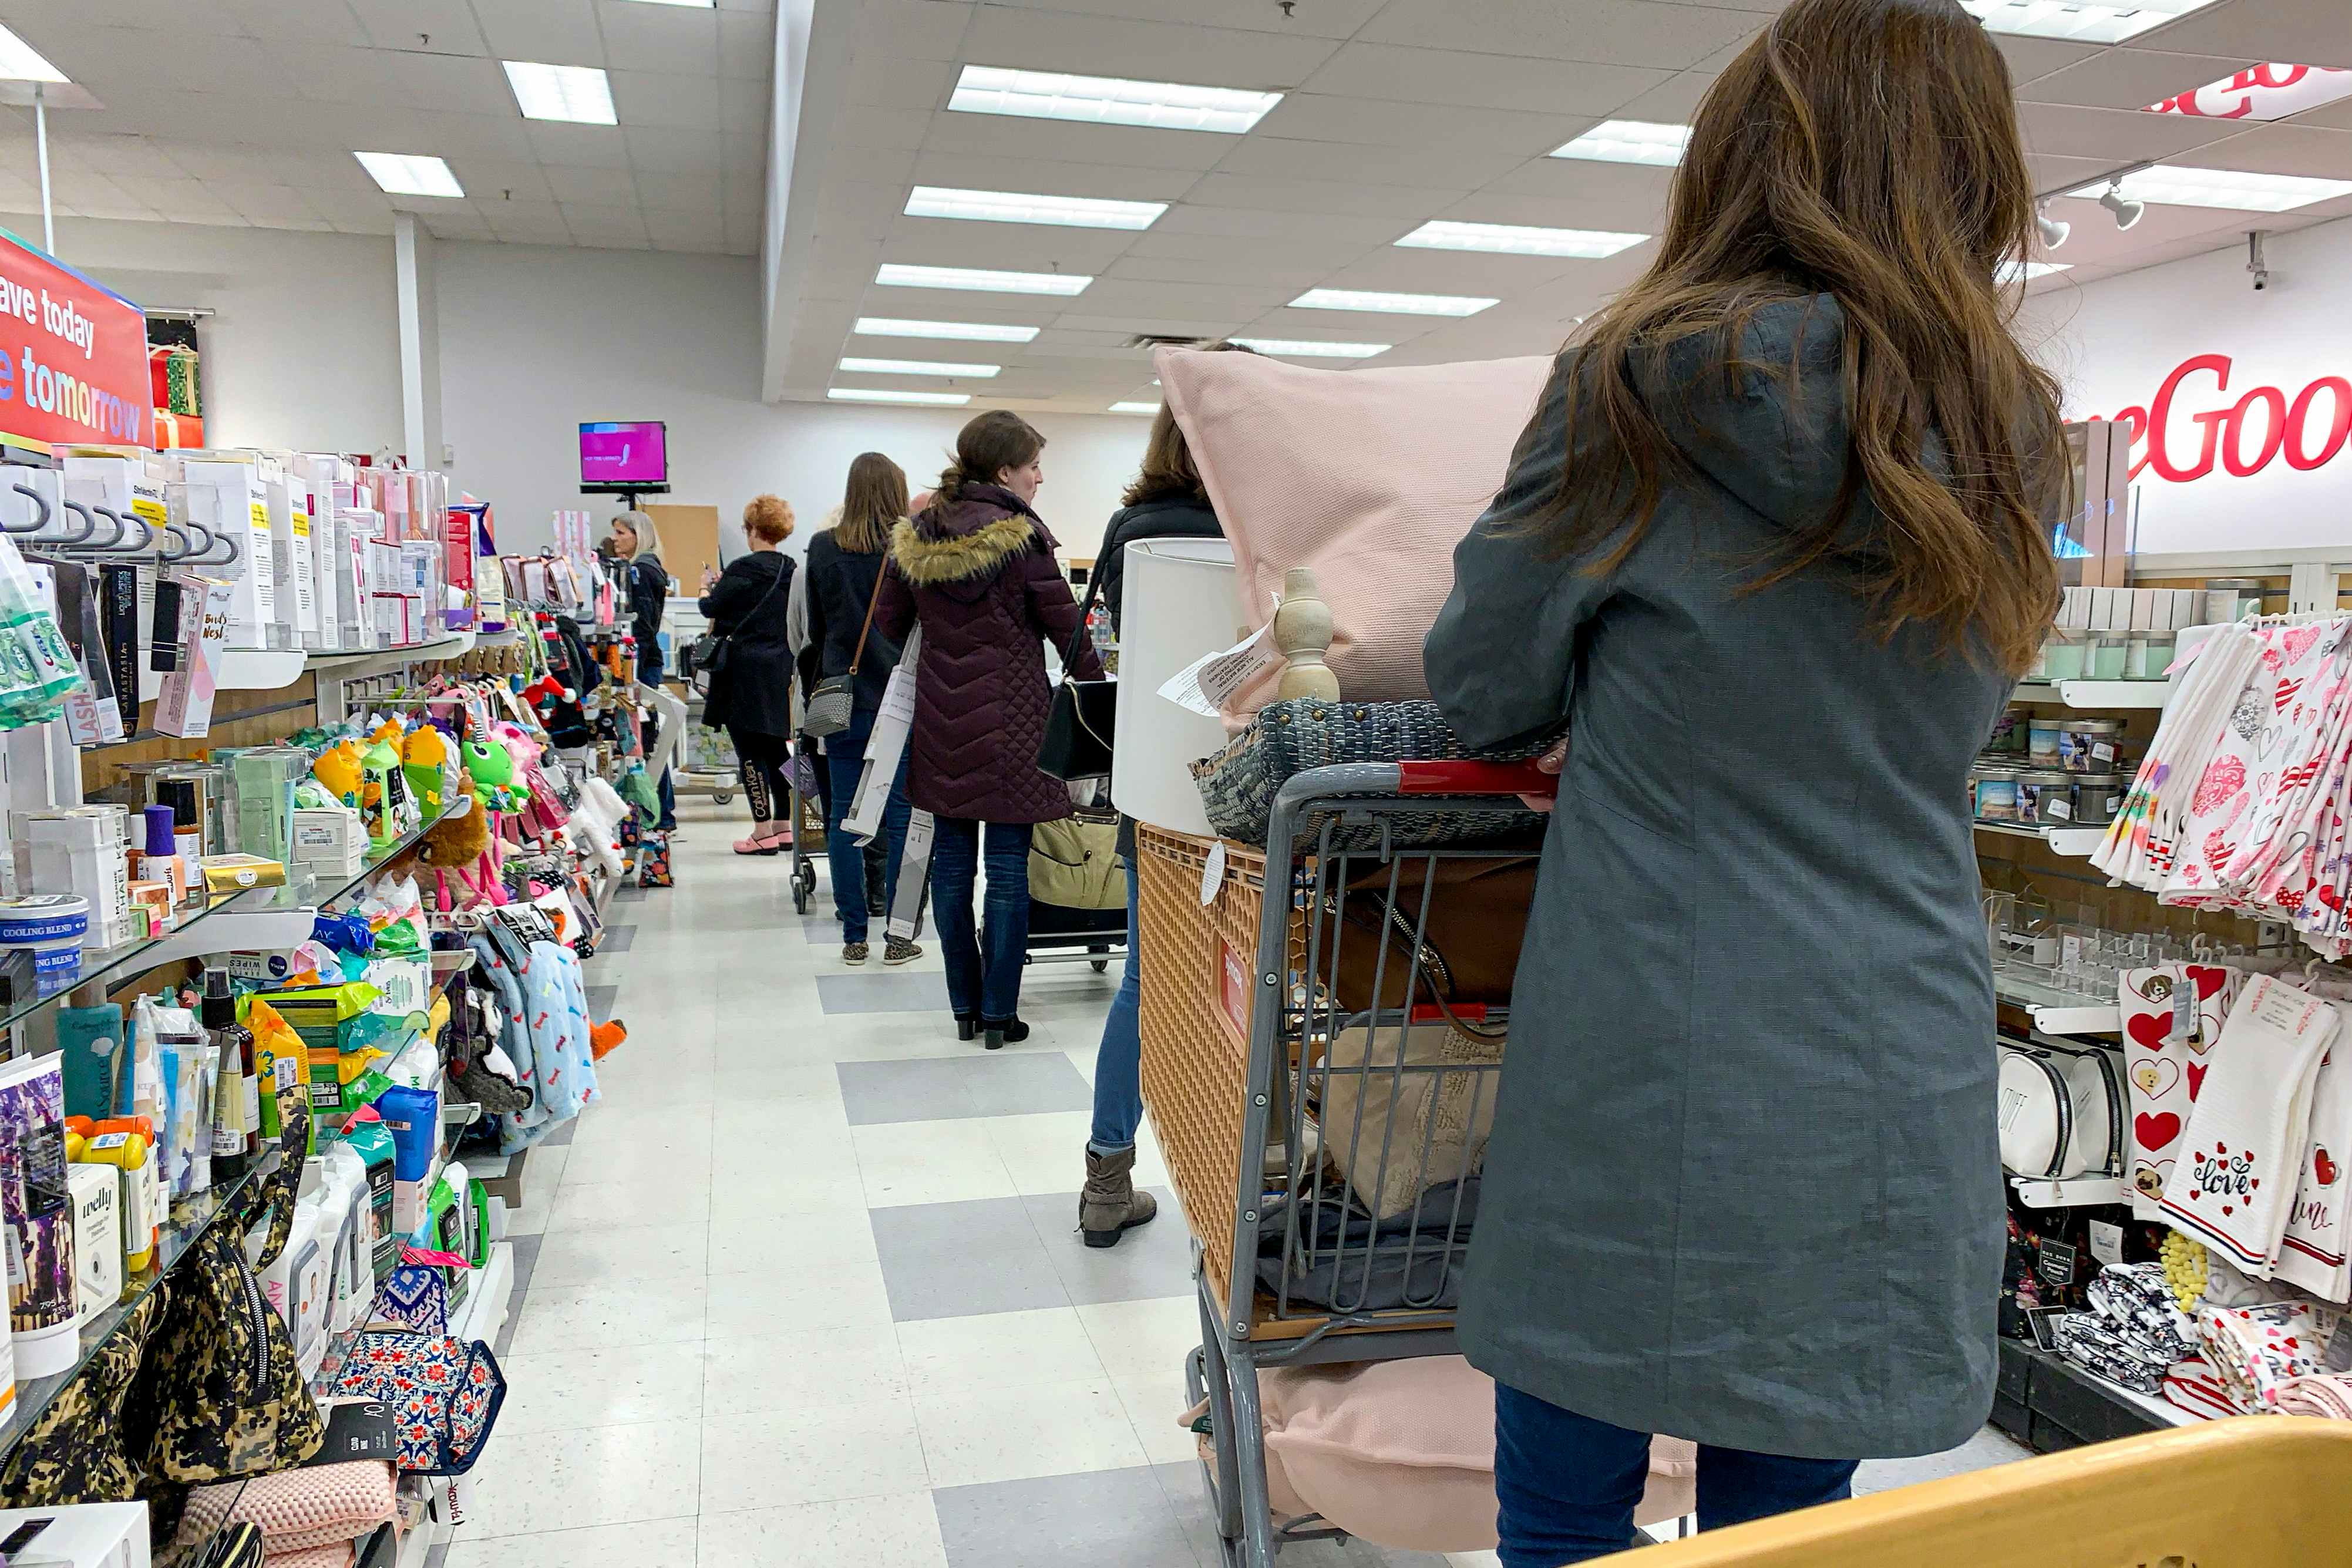 Don't trust 'Compare At' prices — 17 tricks for shopping at T.J.